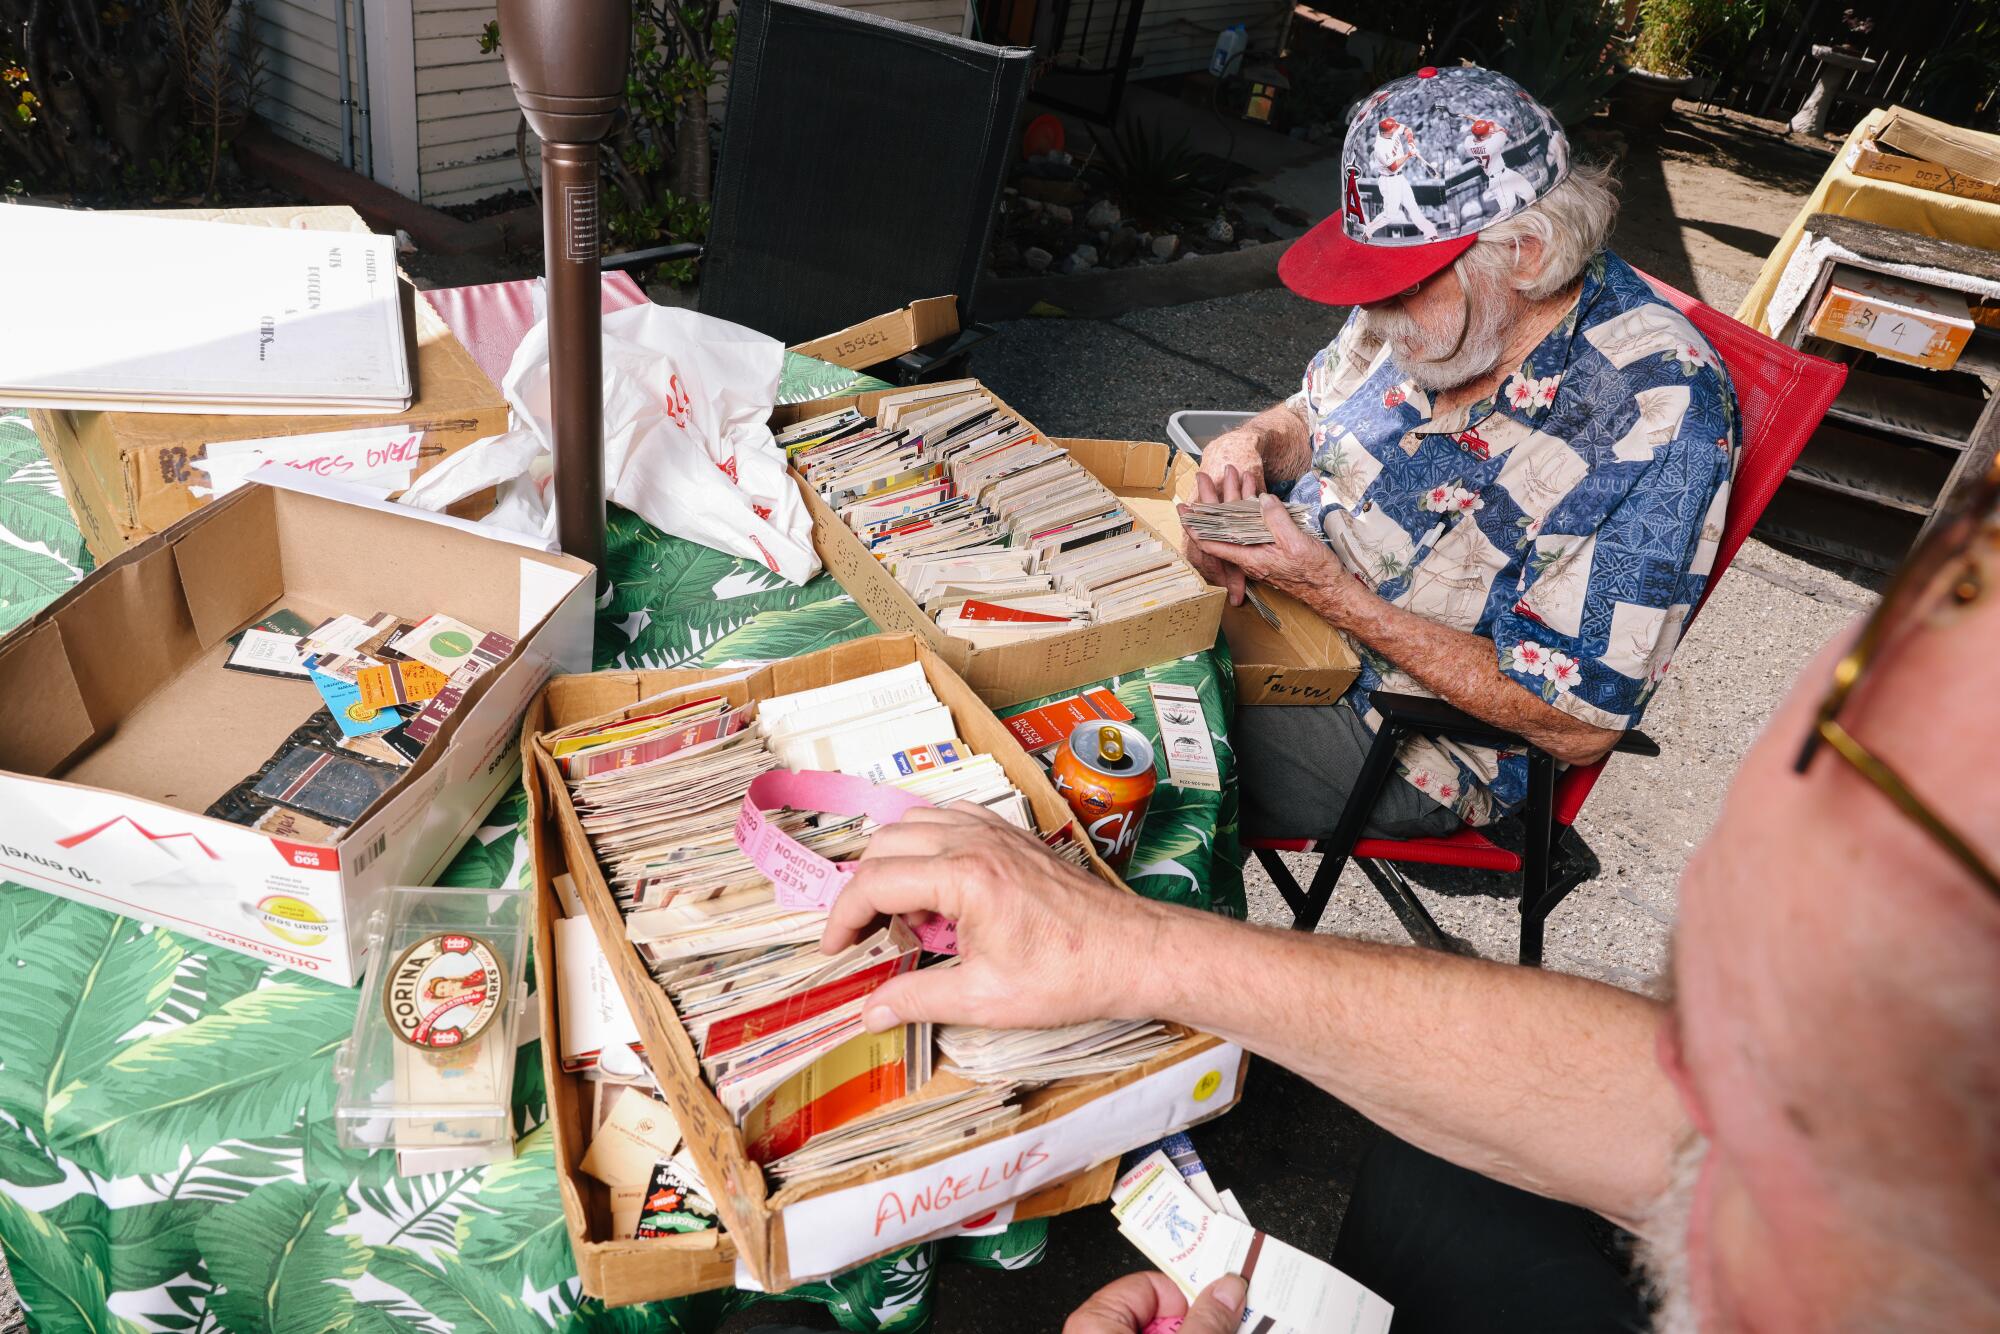 Two men seated at a table sort through boxes of matchbook covers.